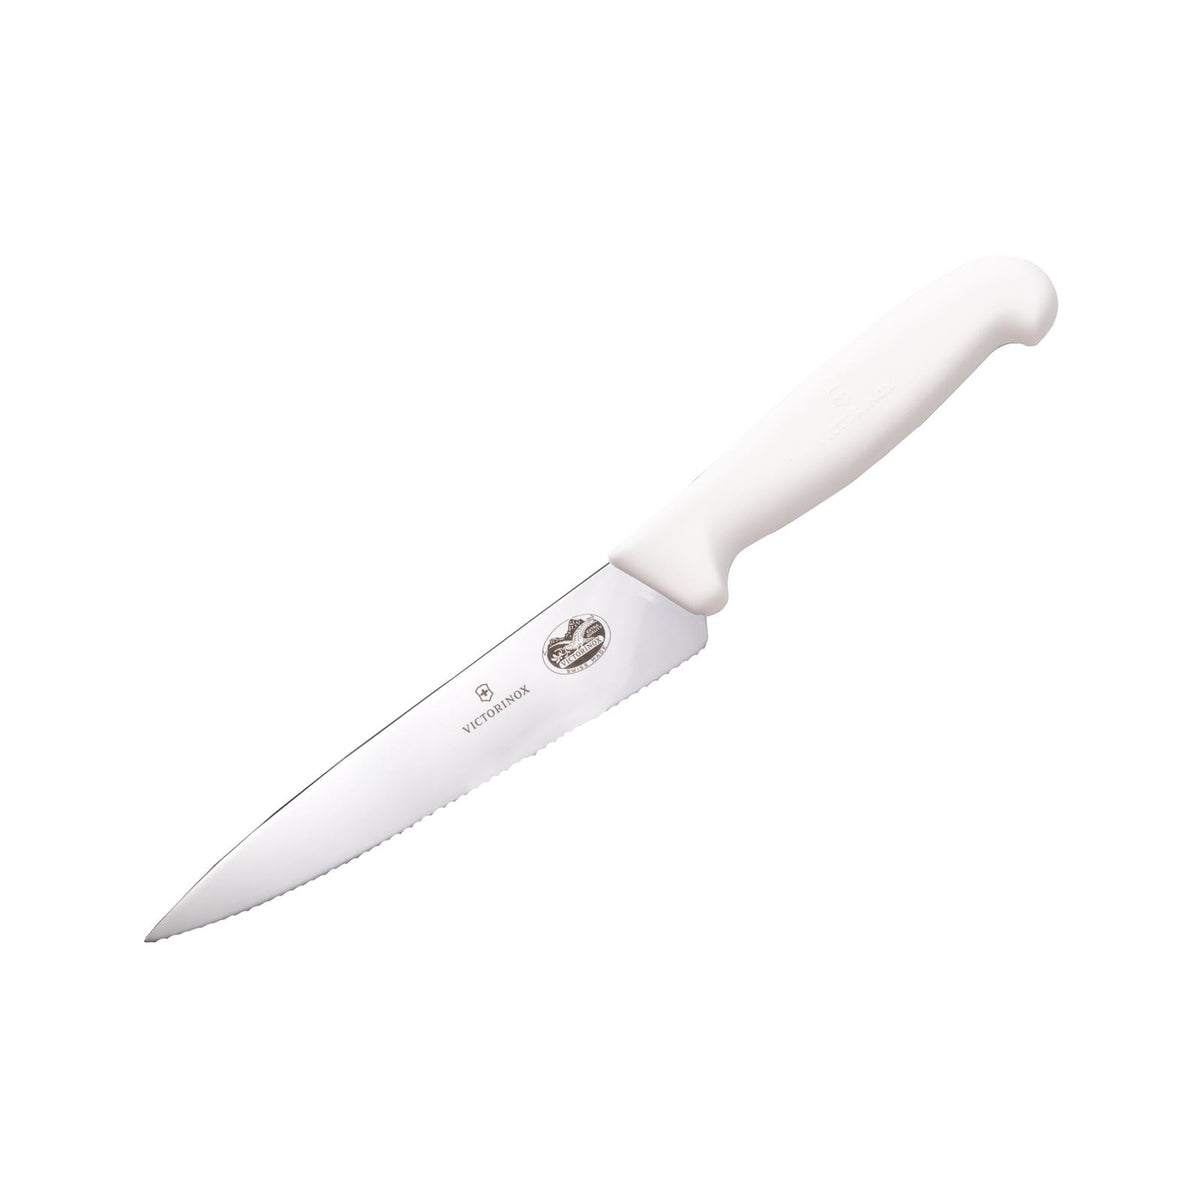 Victorinox Fibrox Serrated Chef Knife, 6 Inch, Various Colors